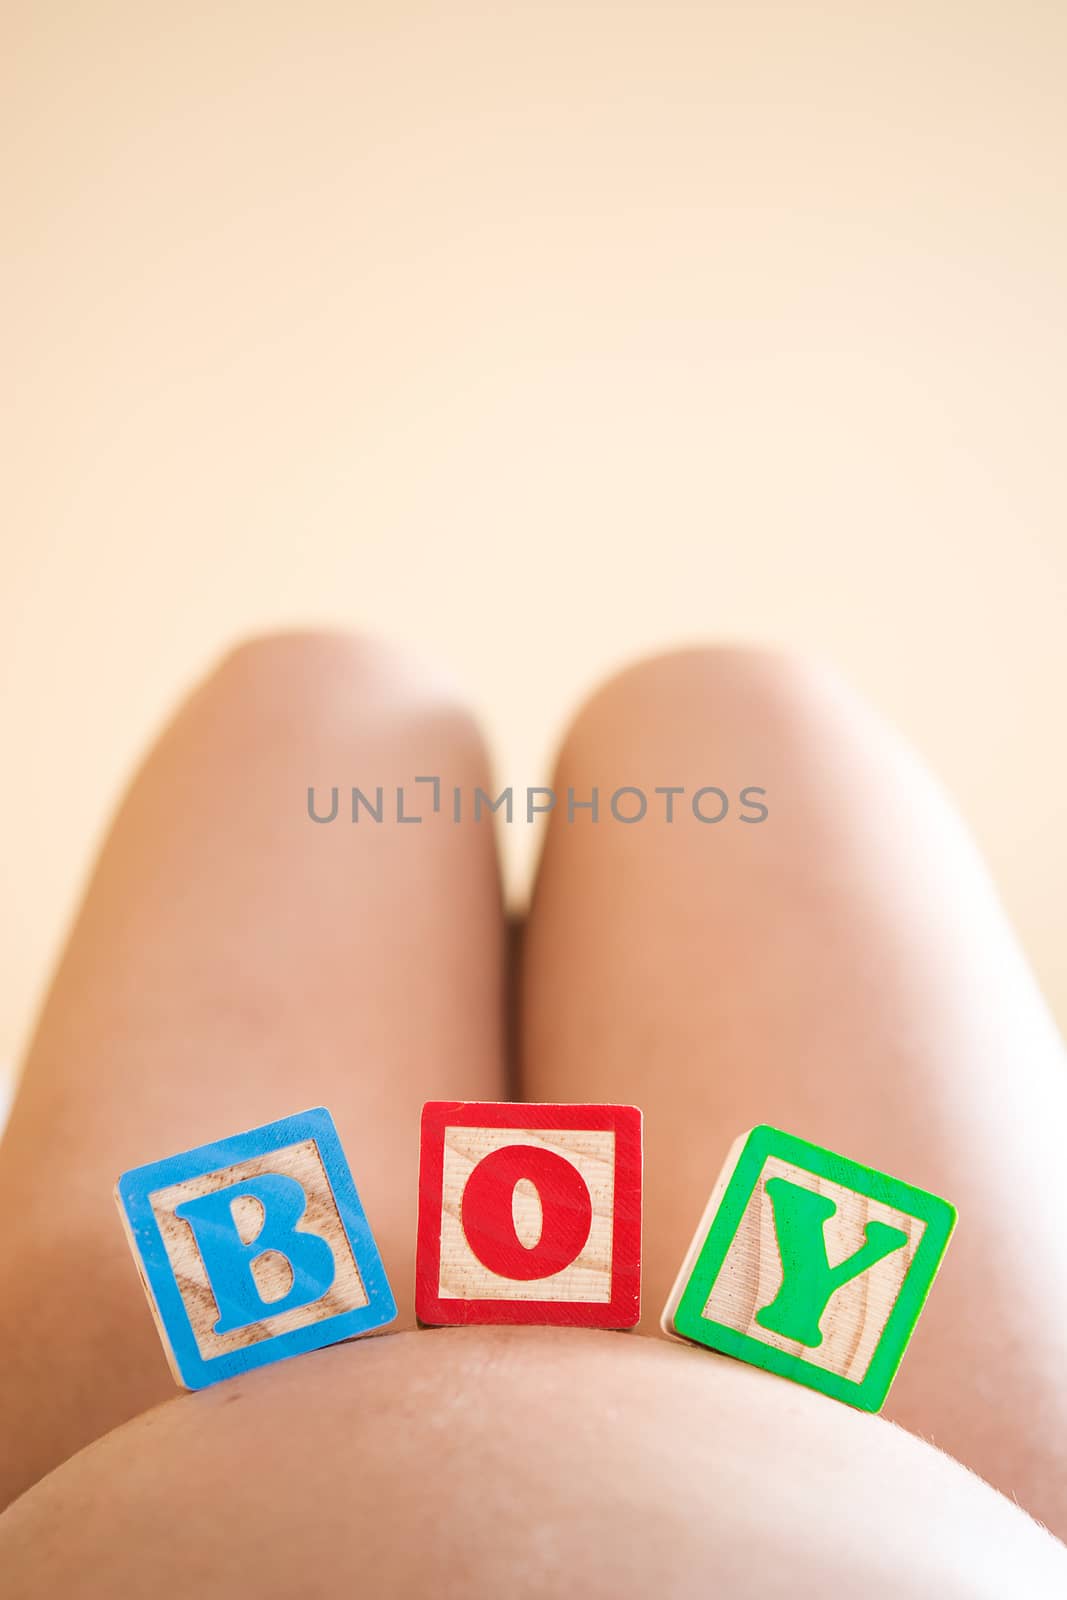 Pregnant woman with boy word on her belly by chandlervid85